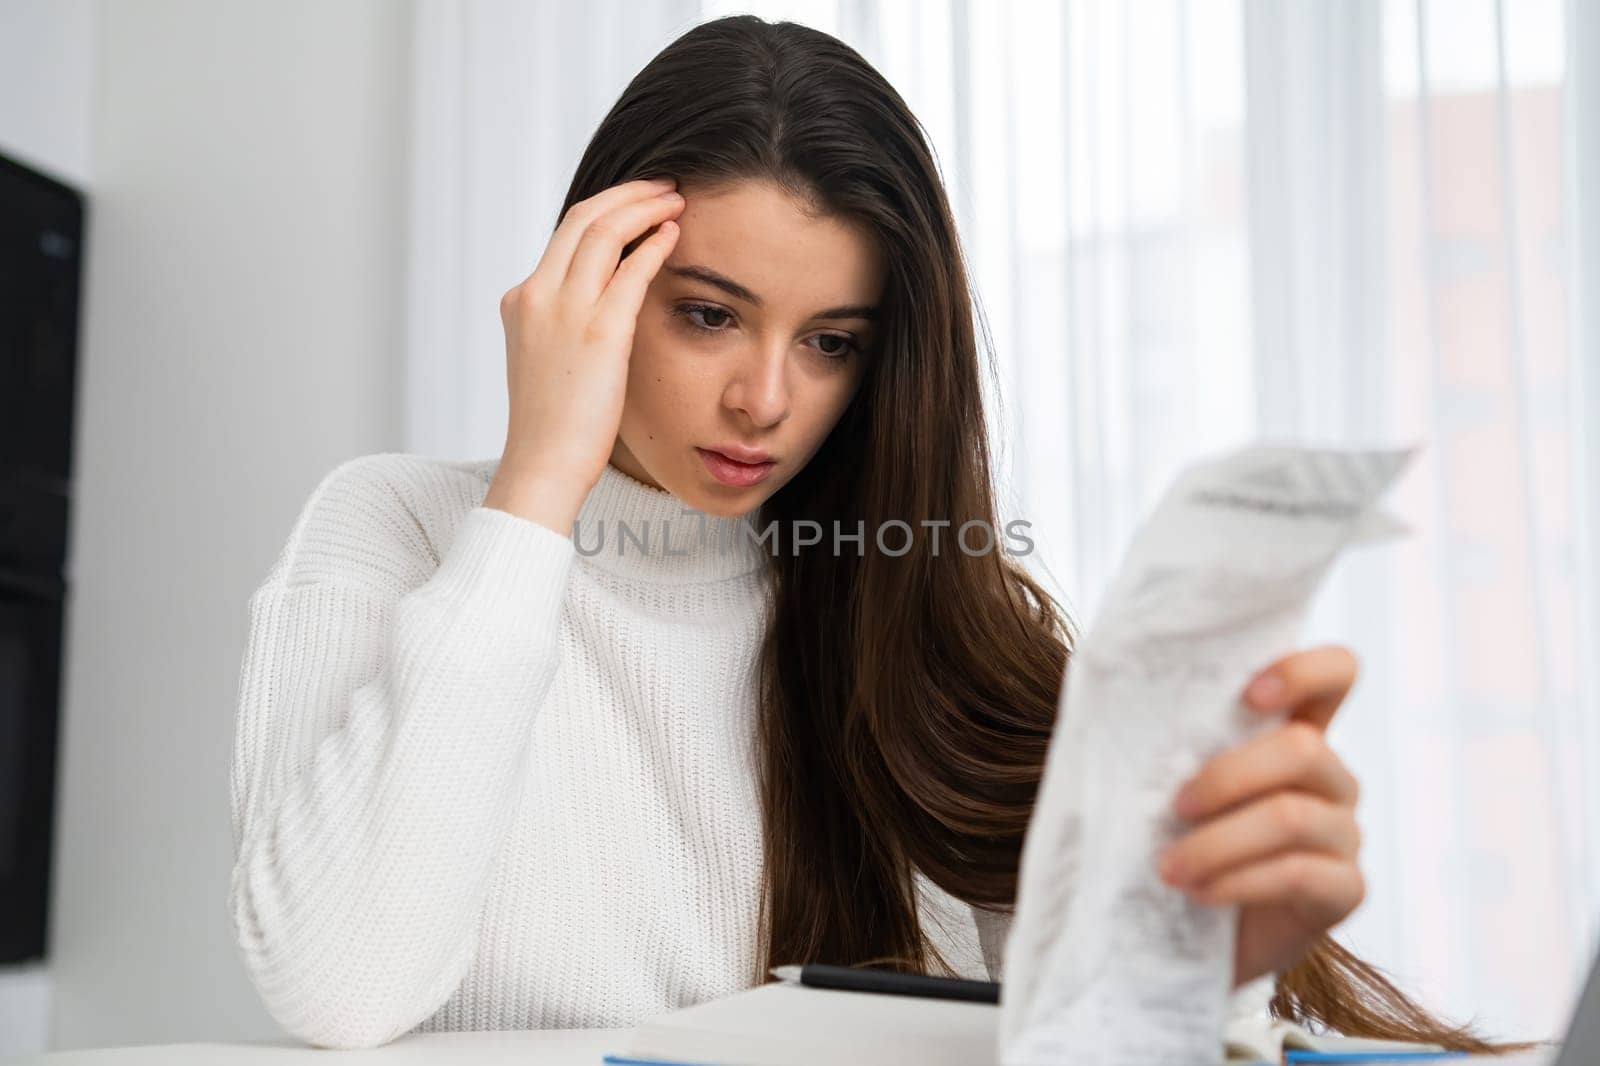 Upset woman looks at spent amount in check after shopping by vladimka